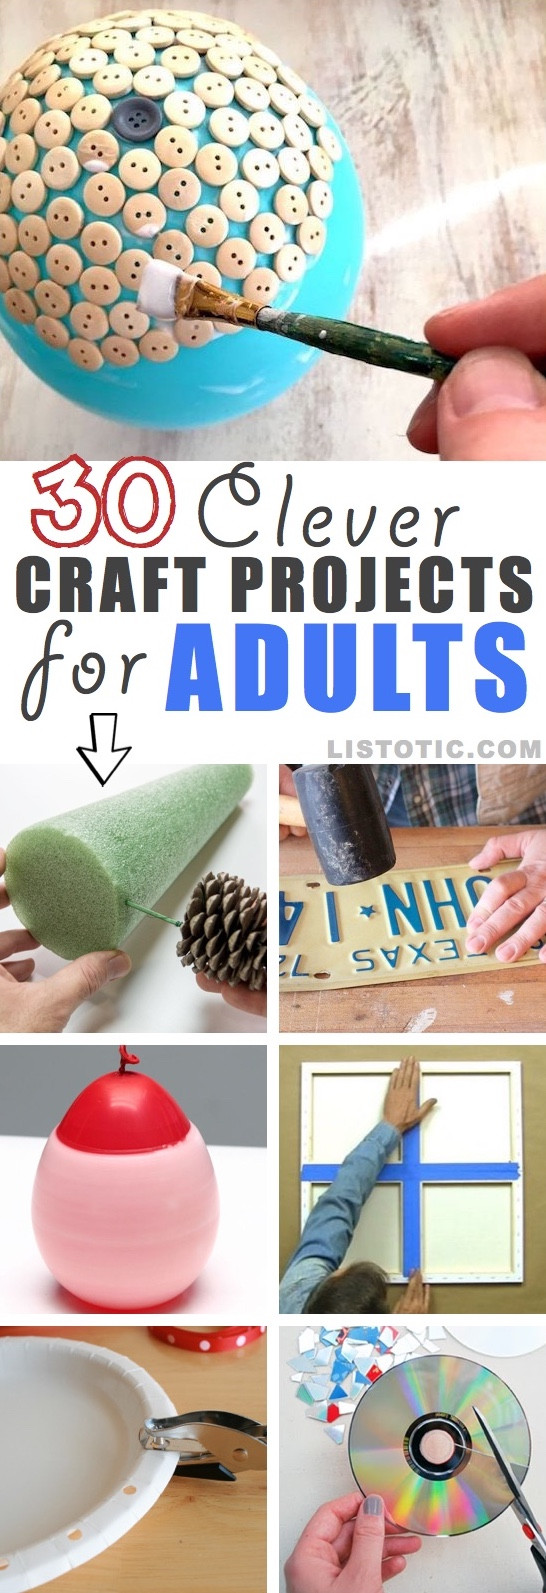 Creative Craft Ideas For Adults
 10 Creative Craft Ideas For Adults Amately